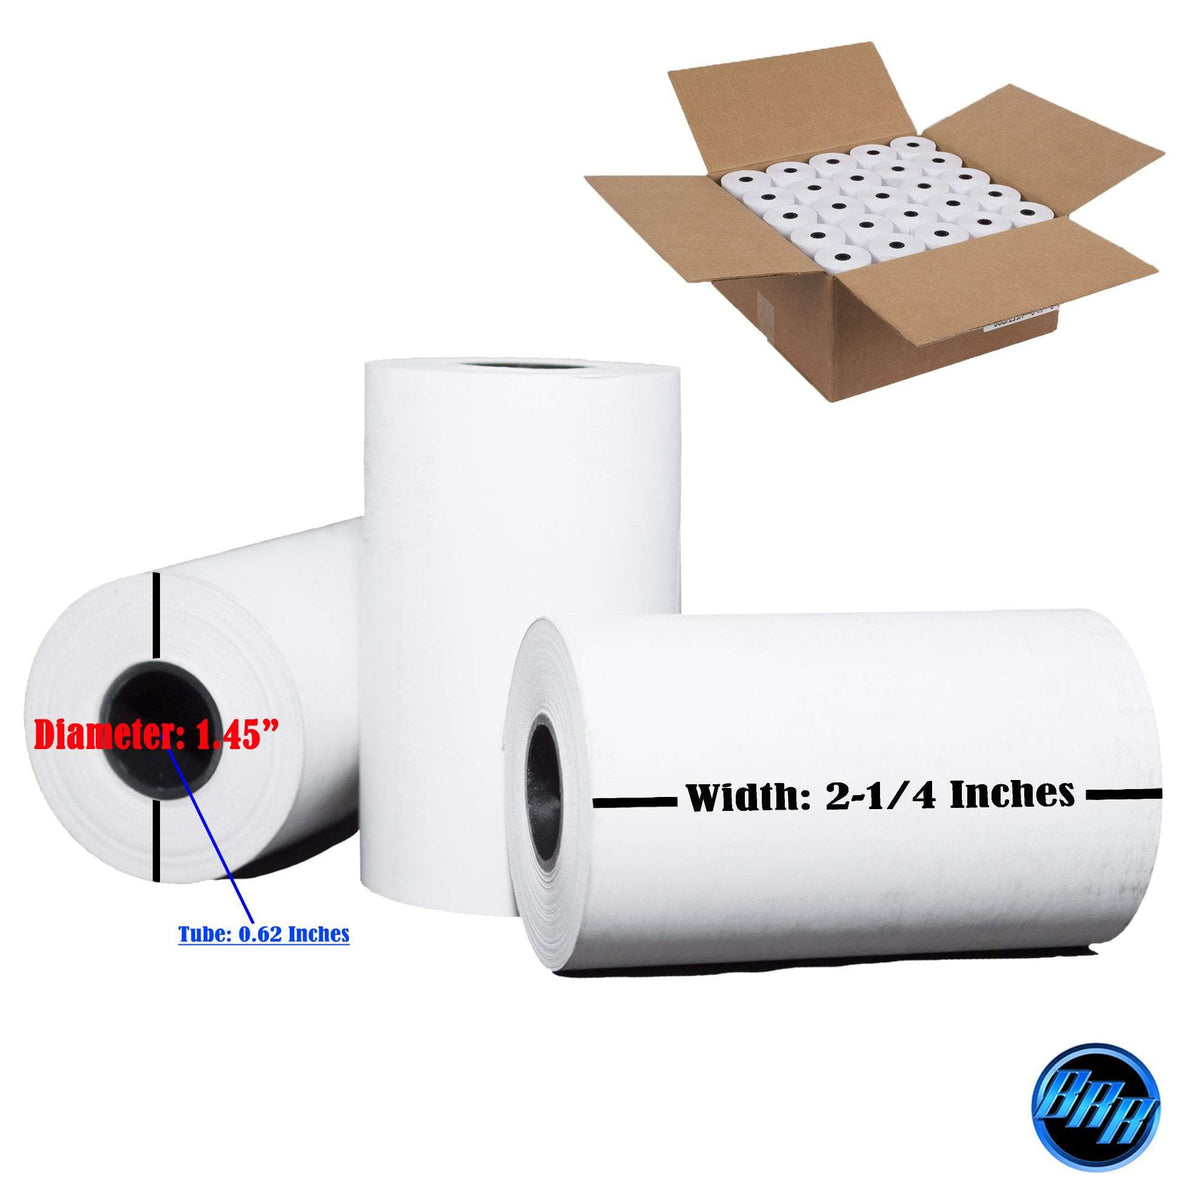 2-1/4" x 50' THERMAL RECEIPT PAPER VERIFONE vx520 36 ROLLS ~FREE SHIPPING~